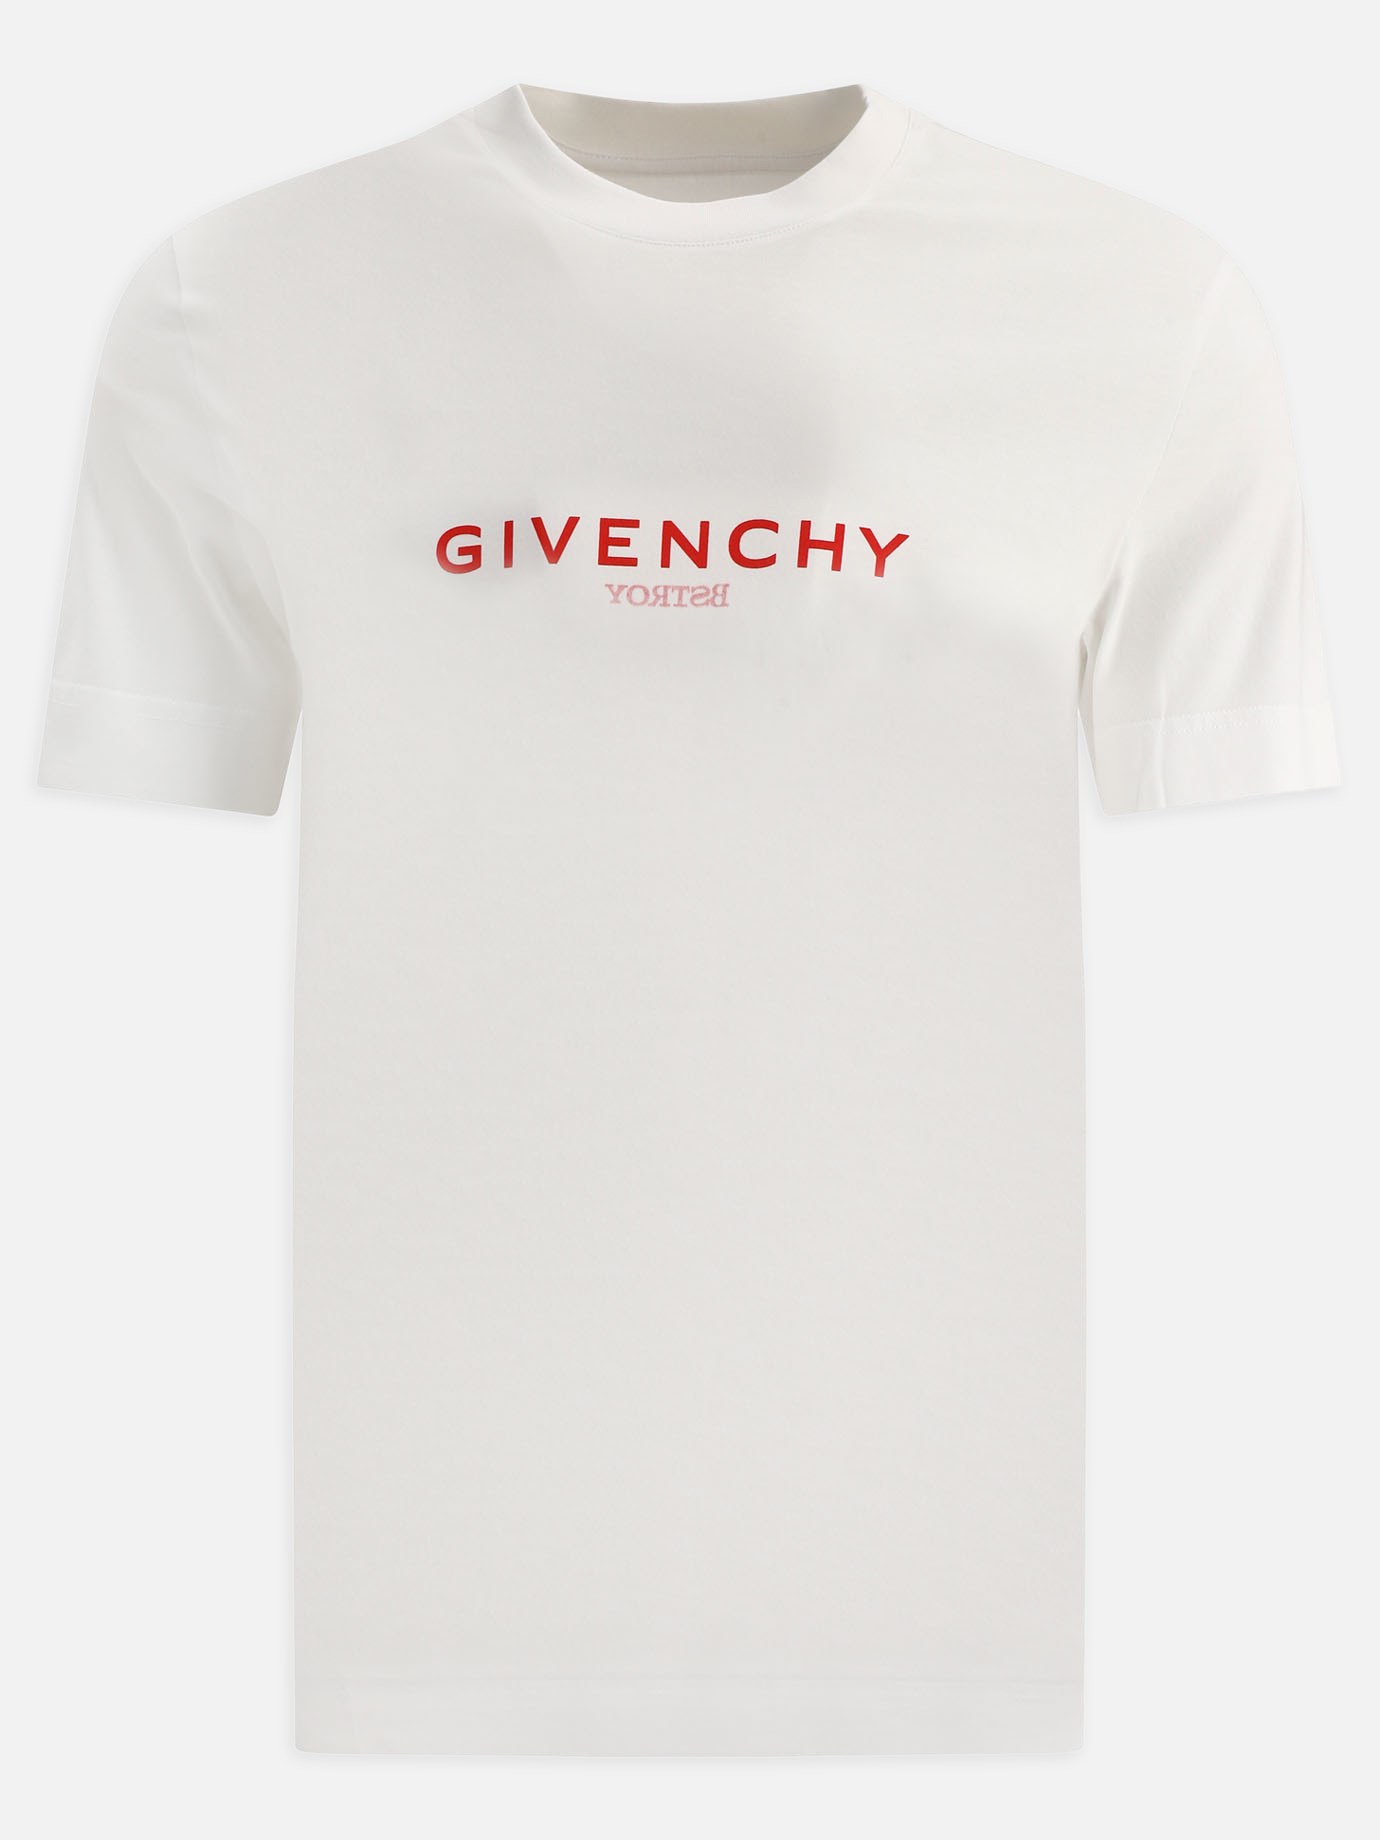 T-shirt reverse  BSTROY x Givenchy by Givenchy - 0